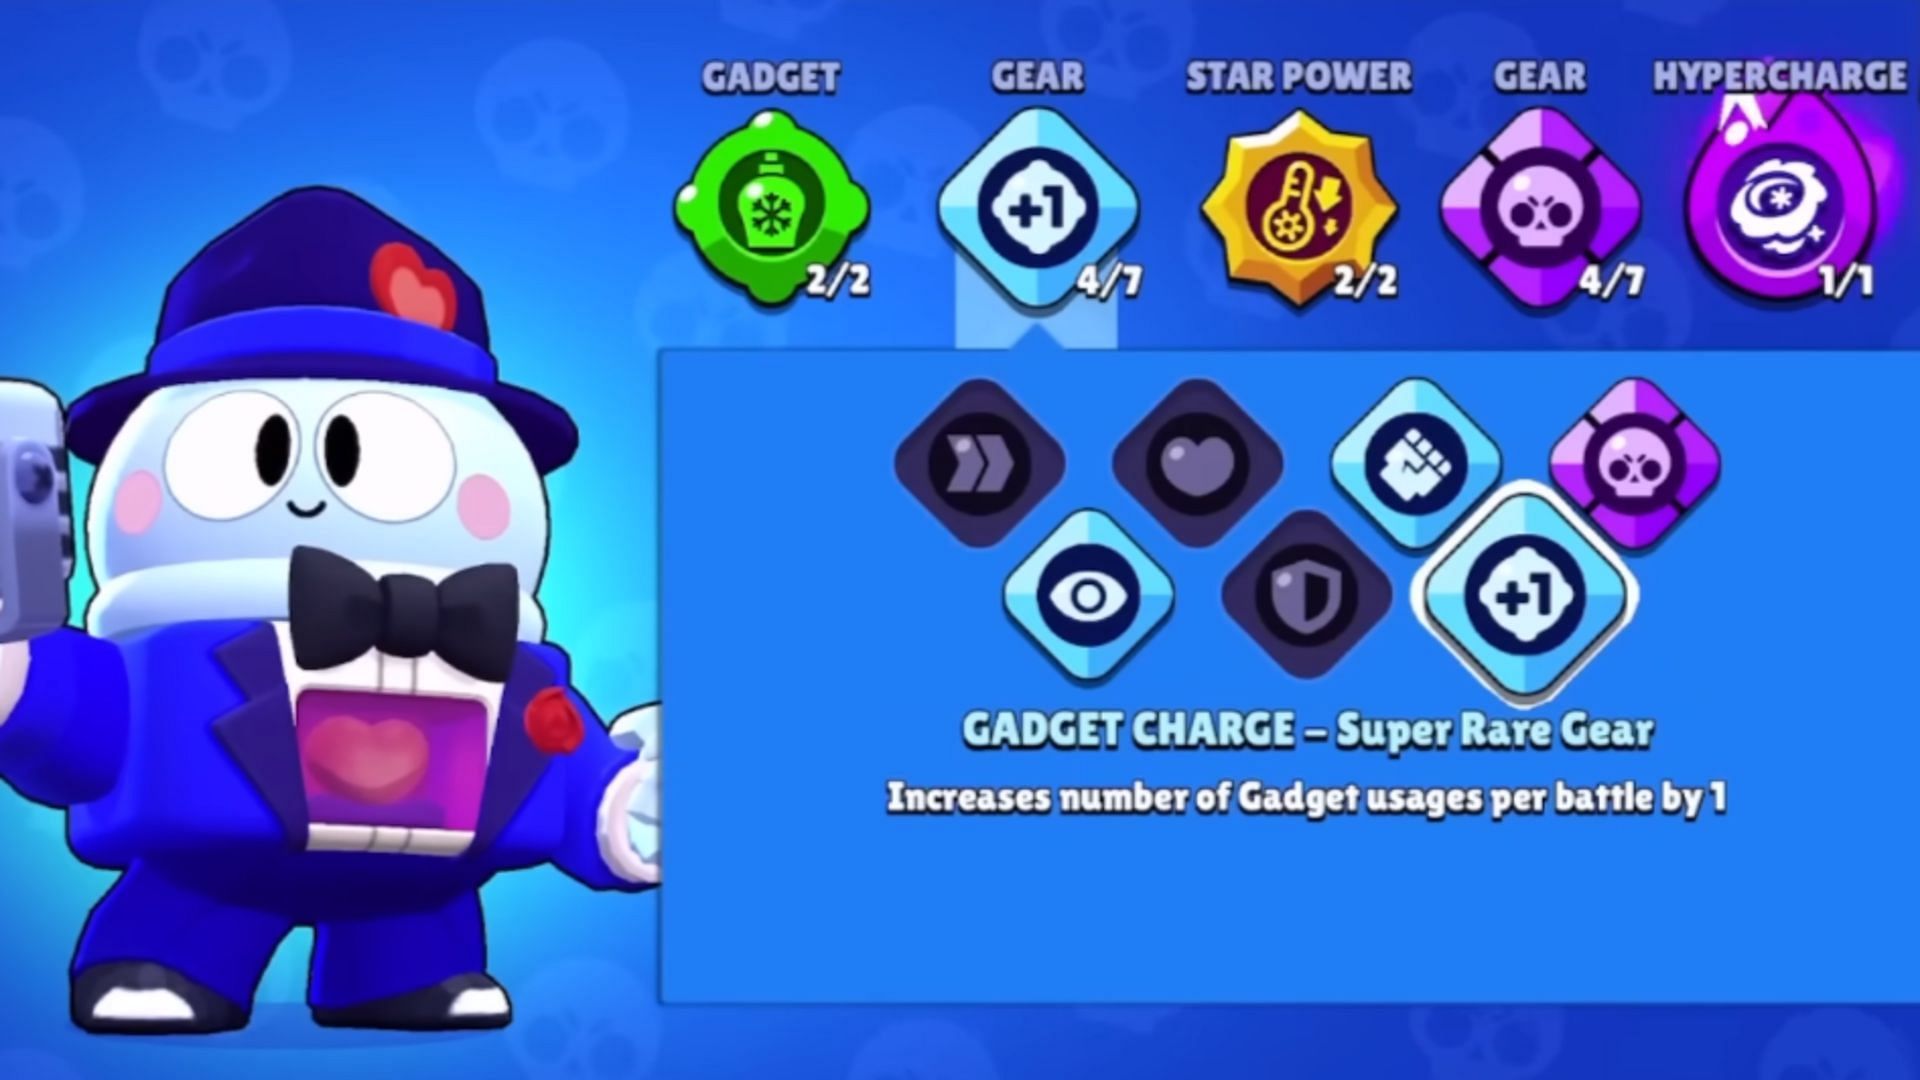 Gadget Charge - Super Rare Gear (Image via Supercell)